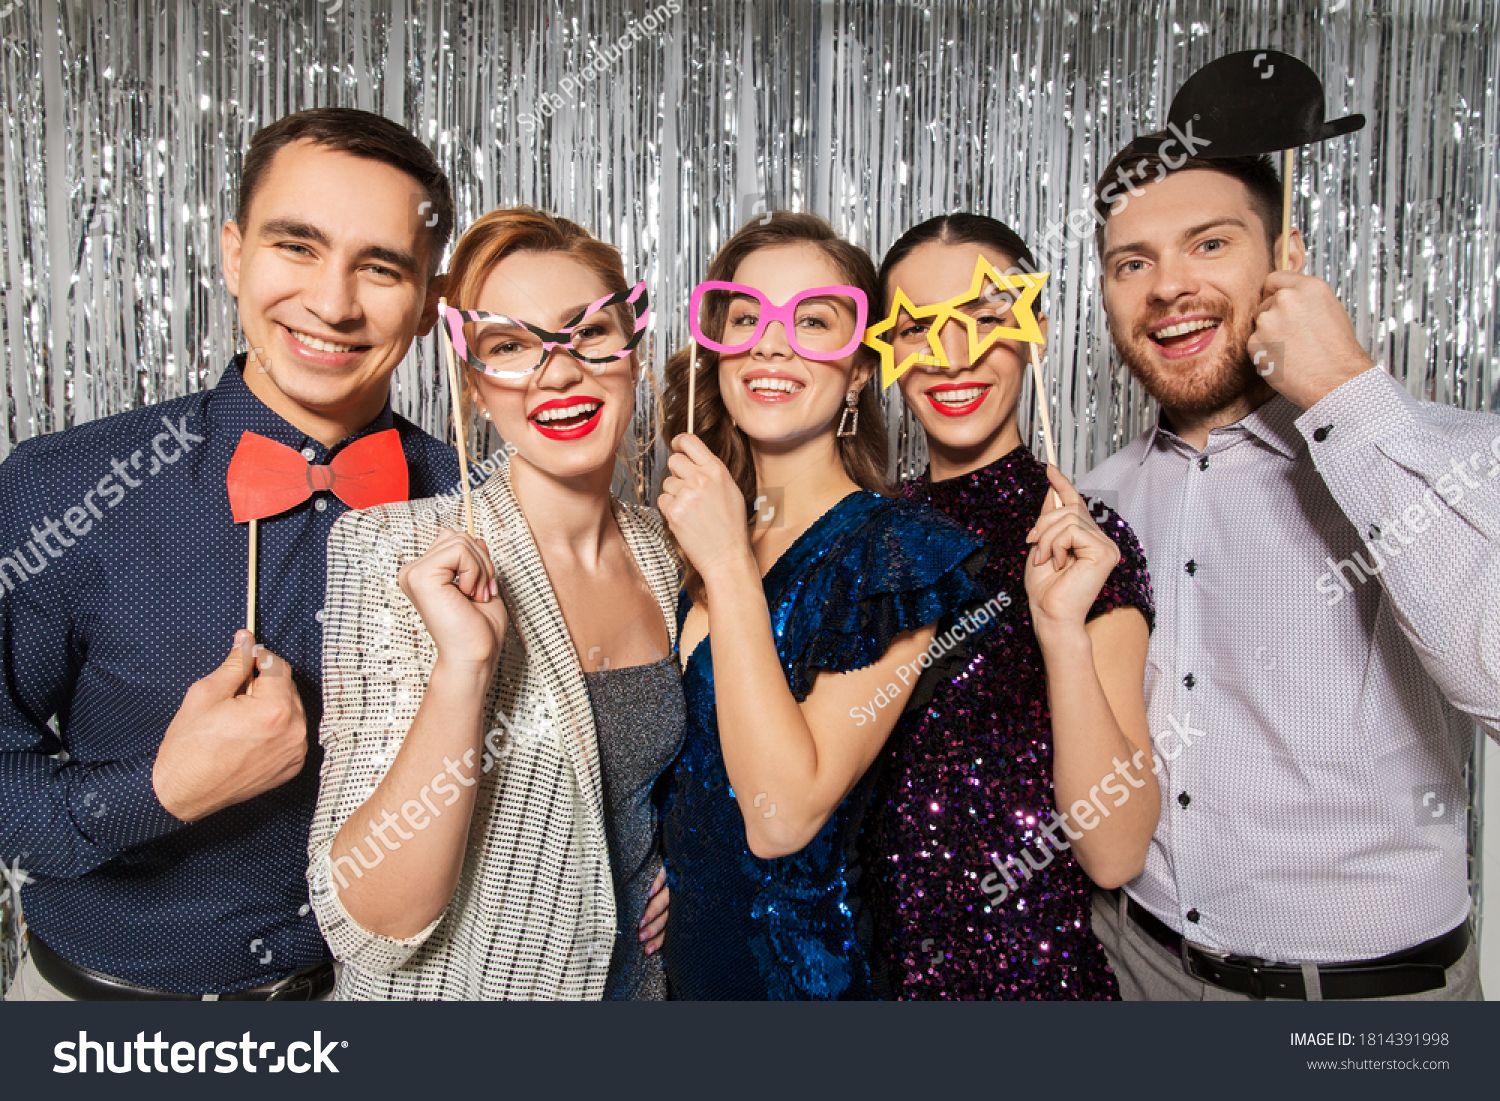 celebration, fun and holiday concept - happy friends posing with party props #1814391998